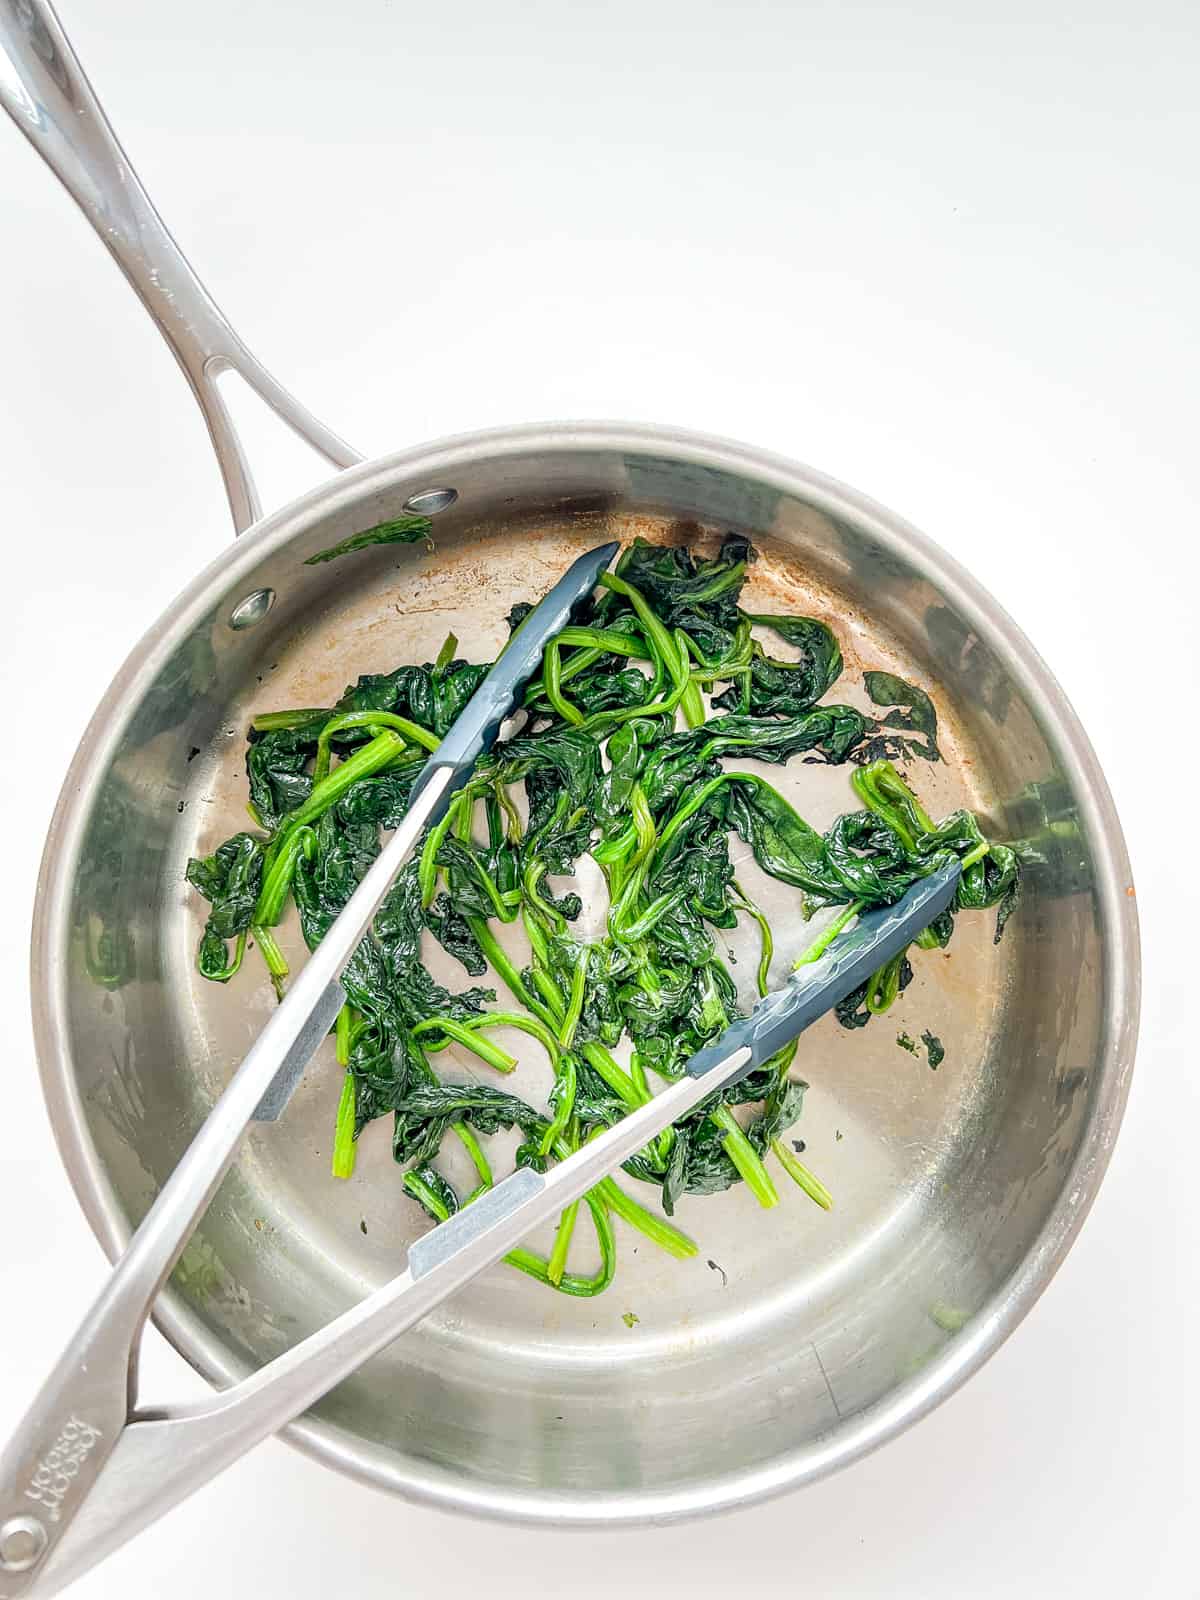 An image of spinach inside a pan after it is cooked.